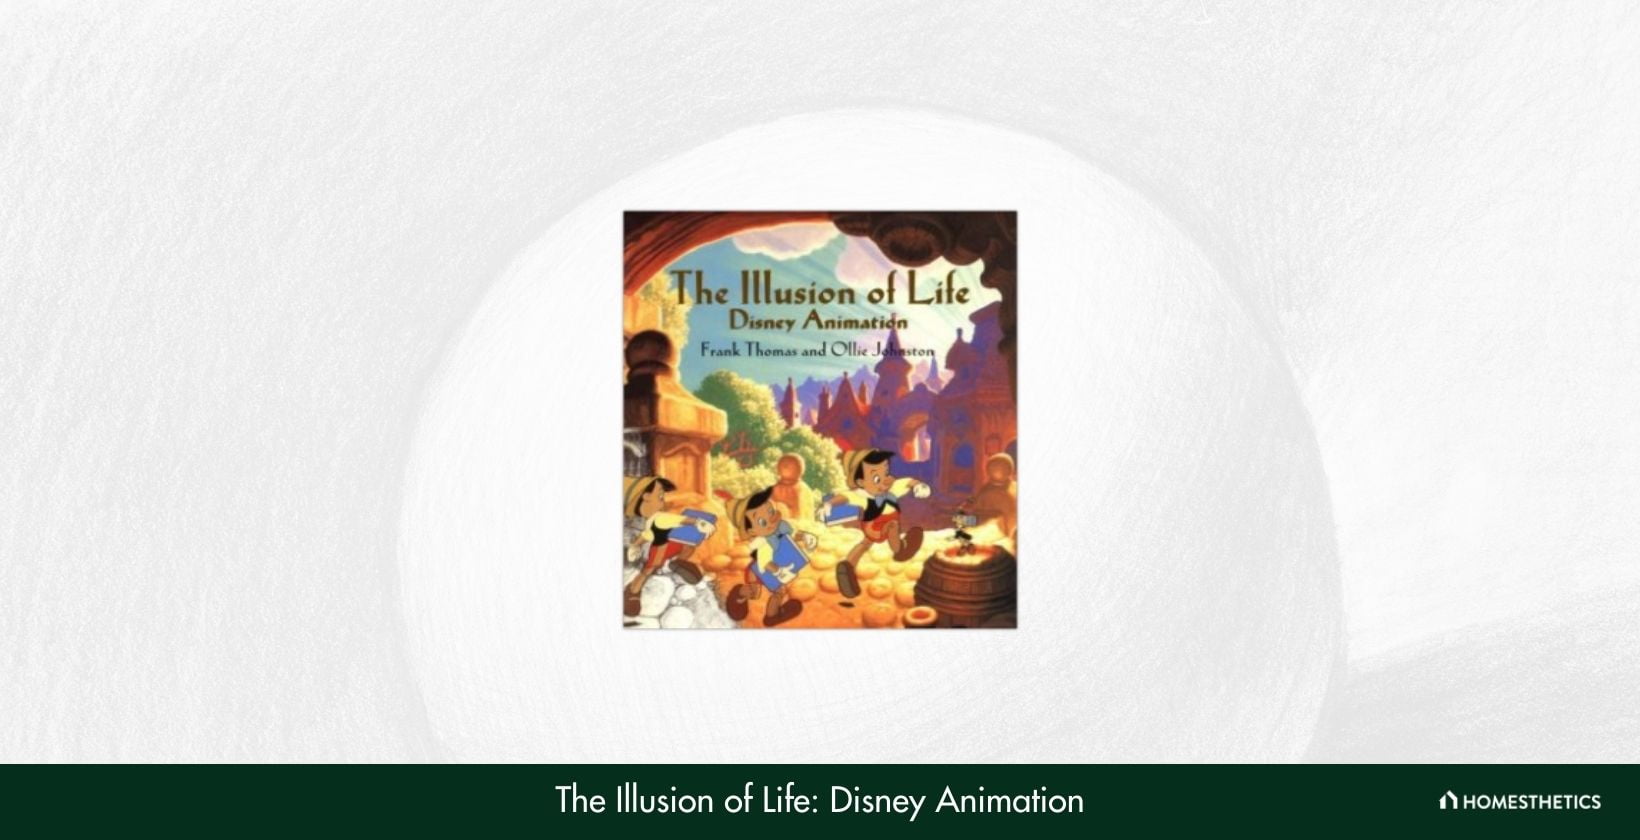 The Illusion of Life Disney Animation by Ollie Johnston and Frank Thomas